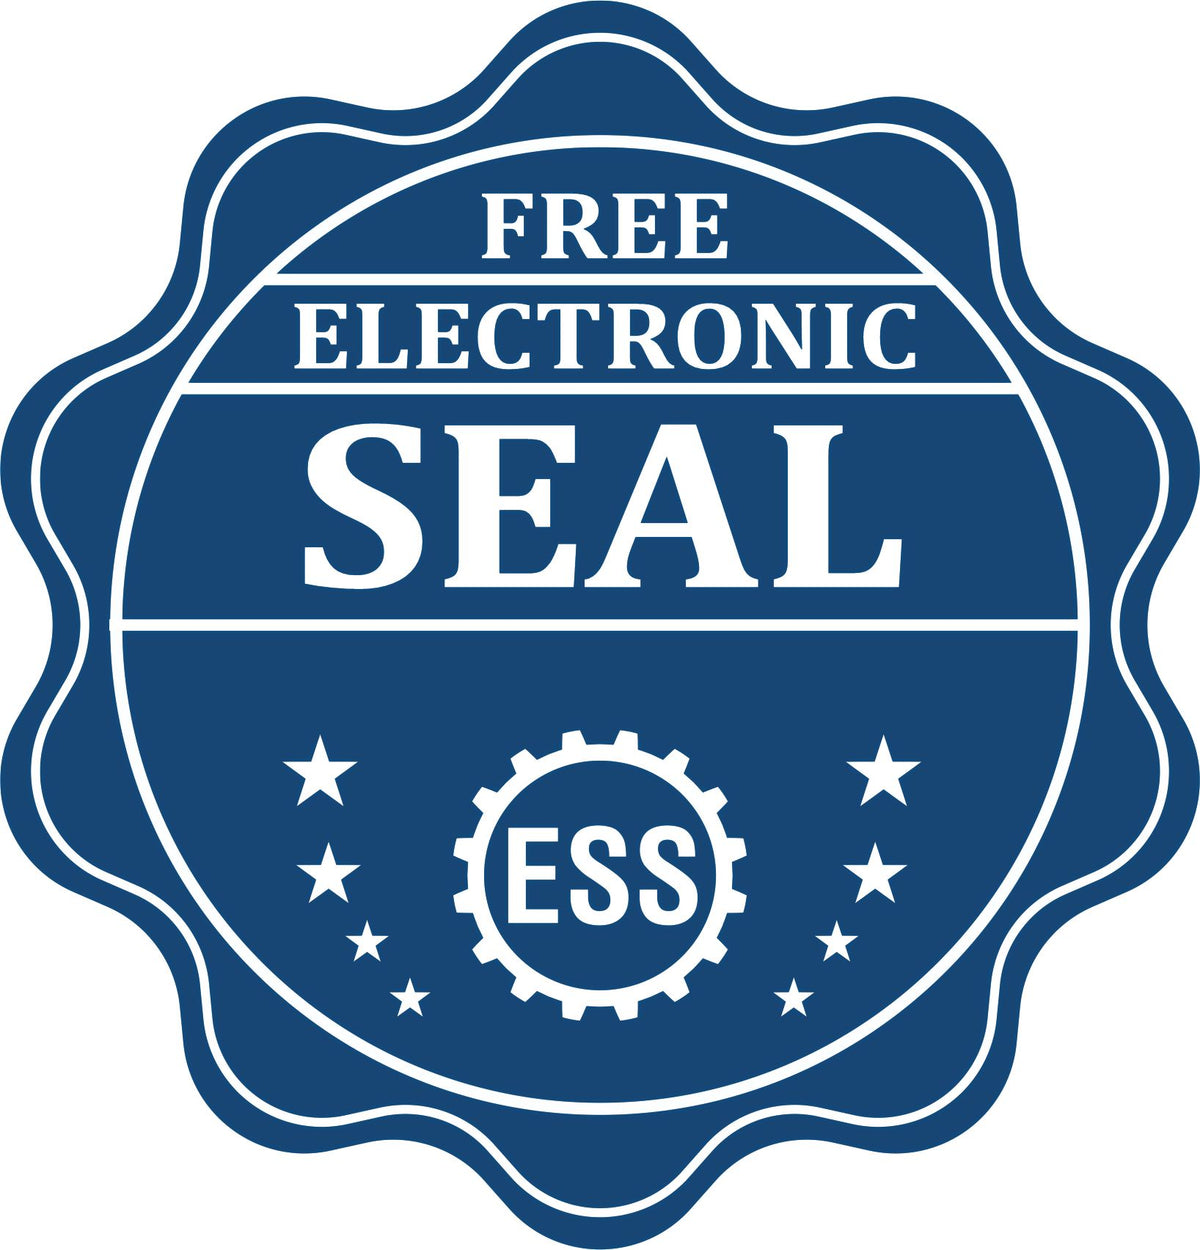 A badge showing a free electronic seal for the Soft Pocket Alabama Landscape Architect Embosser with stars and the ESS gear on the emblem.